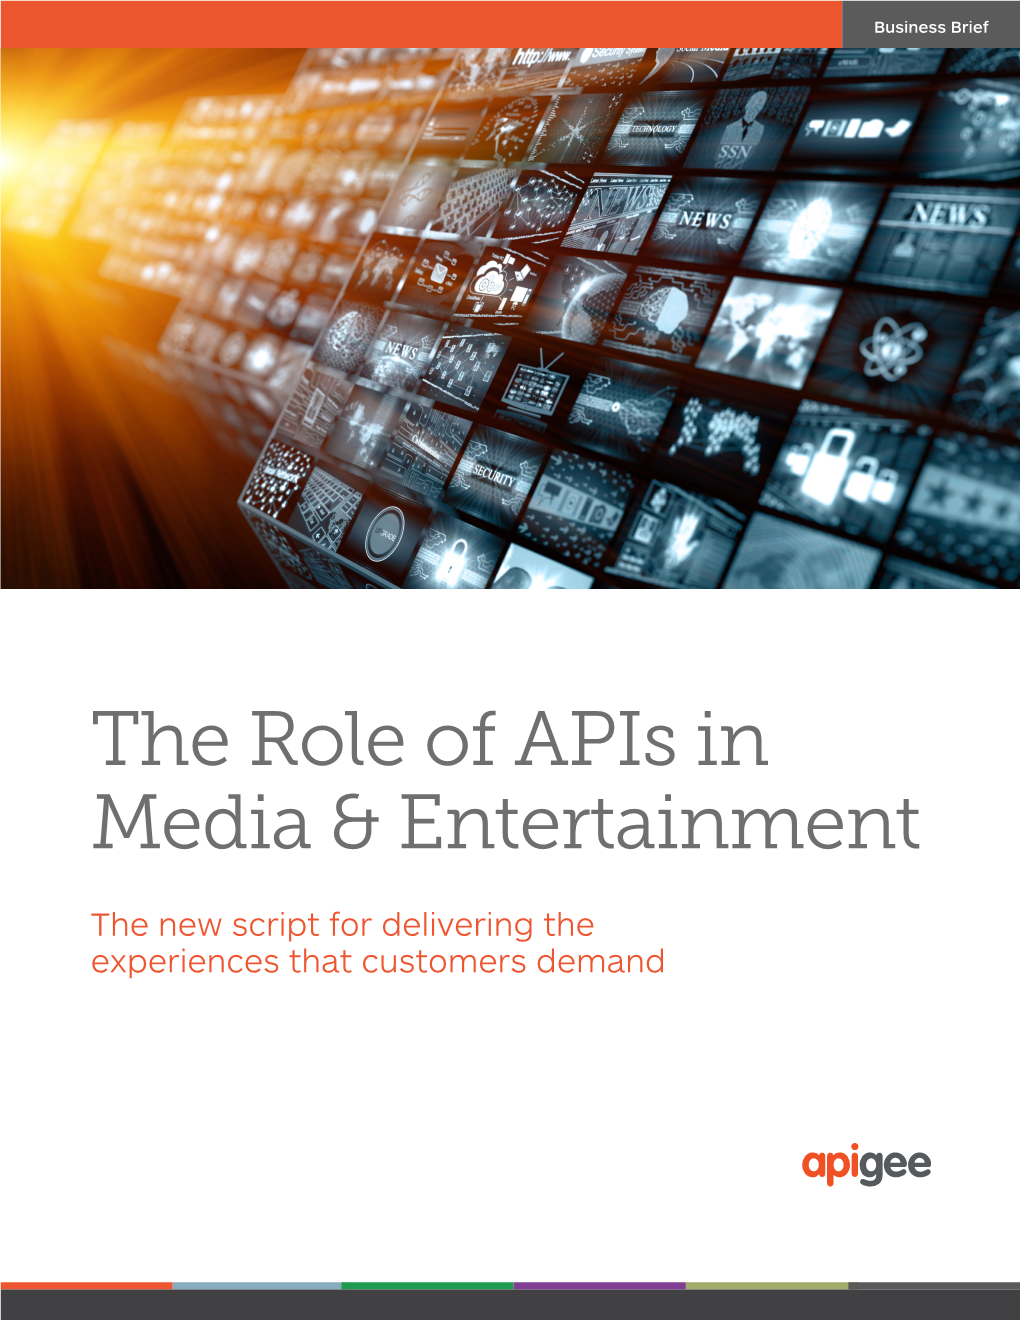 The Role of Apis in Media & Entertainment